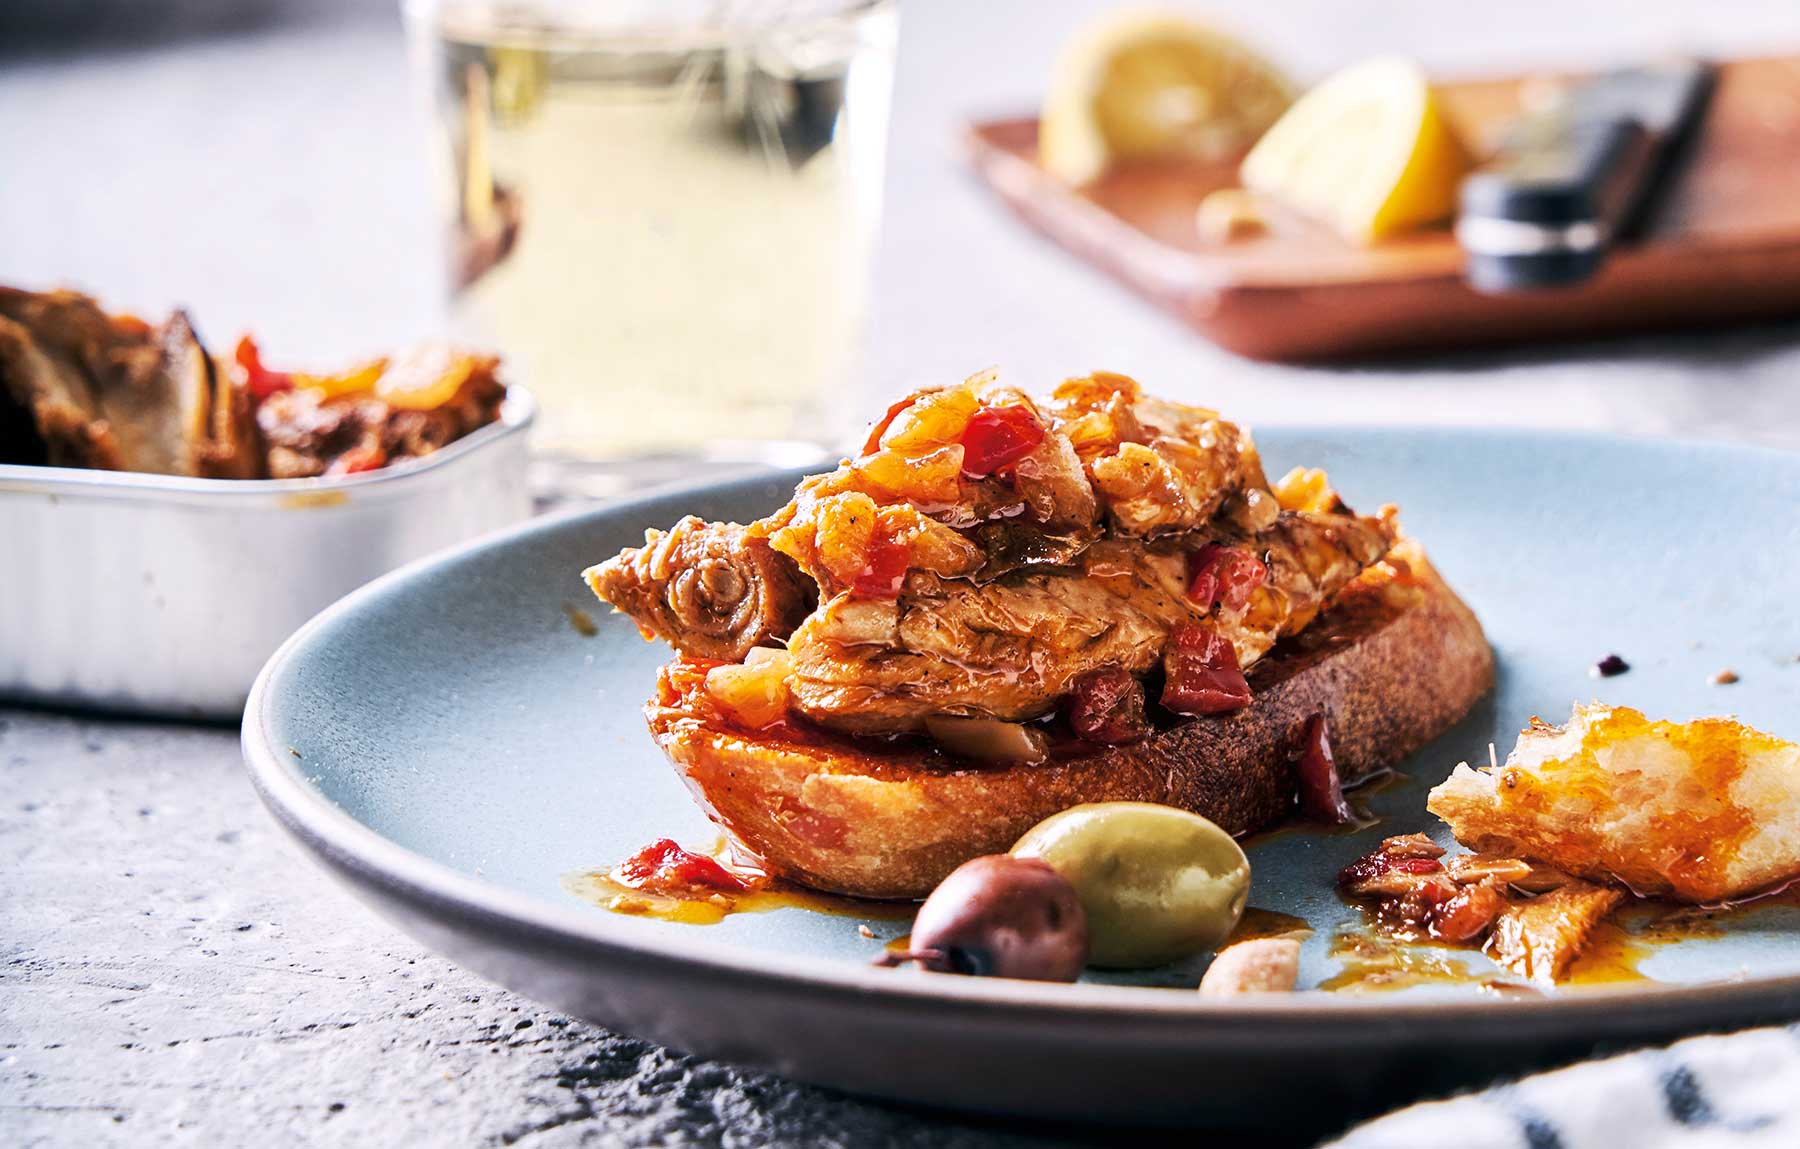 A kitchen snack of Provisions Spanish Paprika Wild Mackerel, with a glass of albariño.